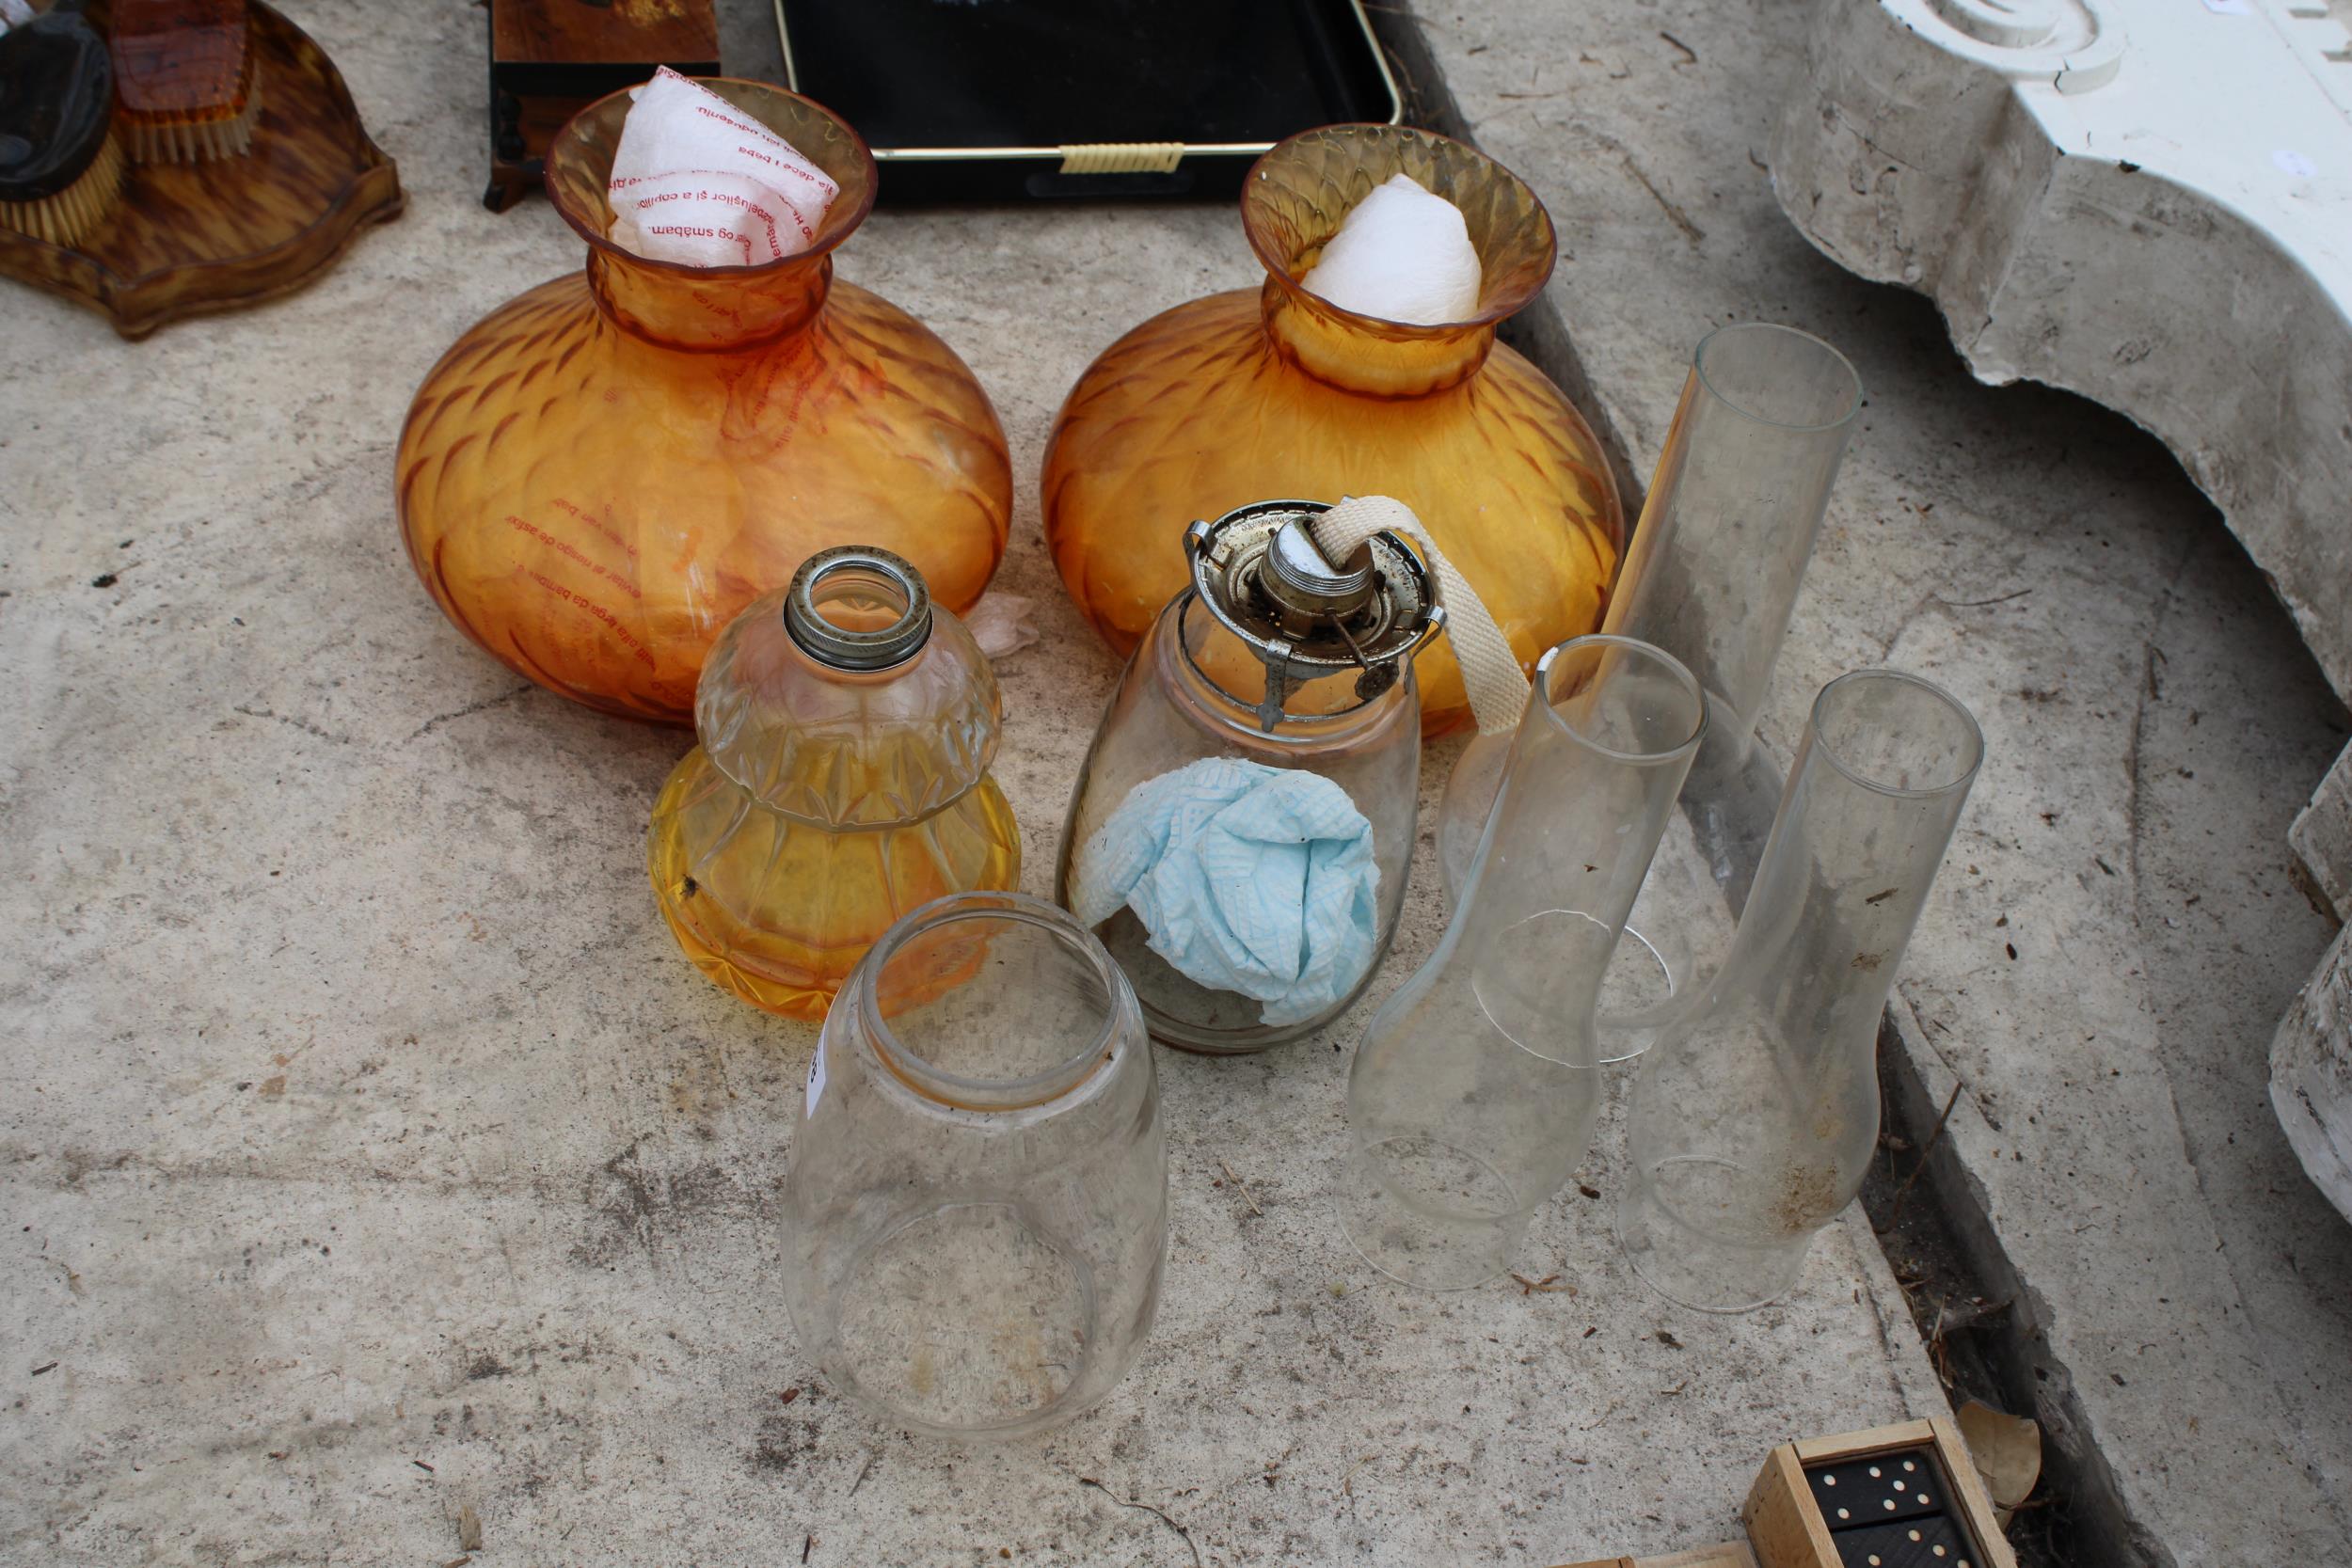 TWO GLASS OIL LAMPS WITH CLEAR AND ORANGE GLASS SHADES - Image 2 of 2